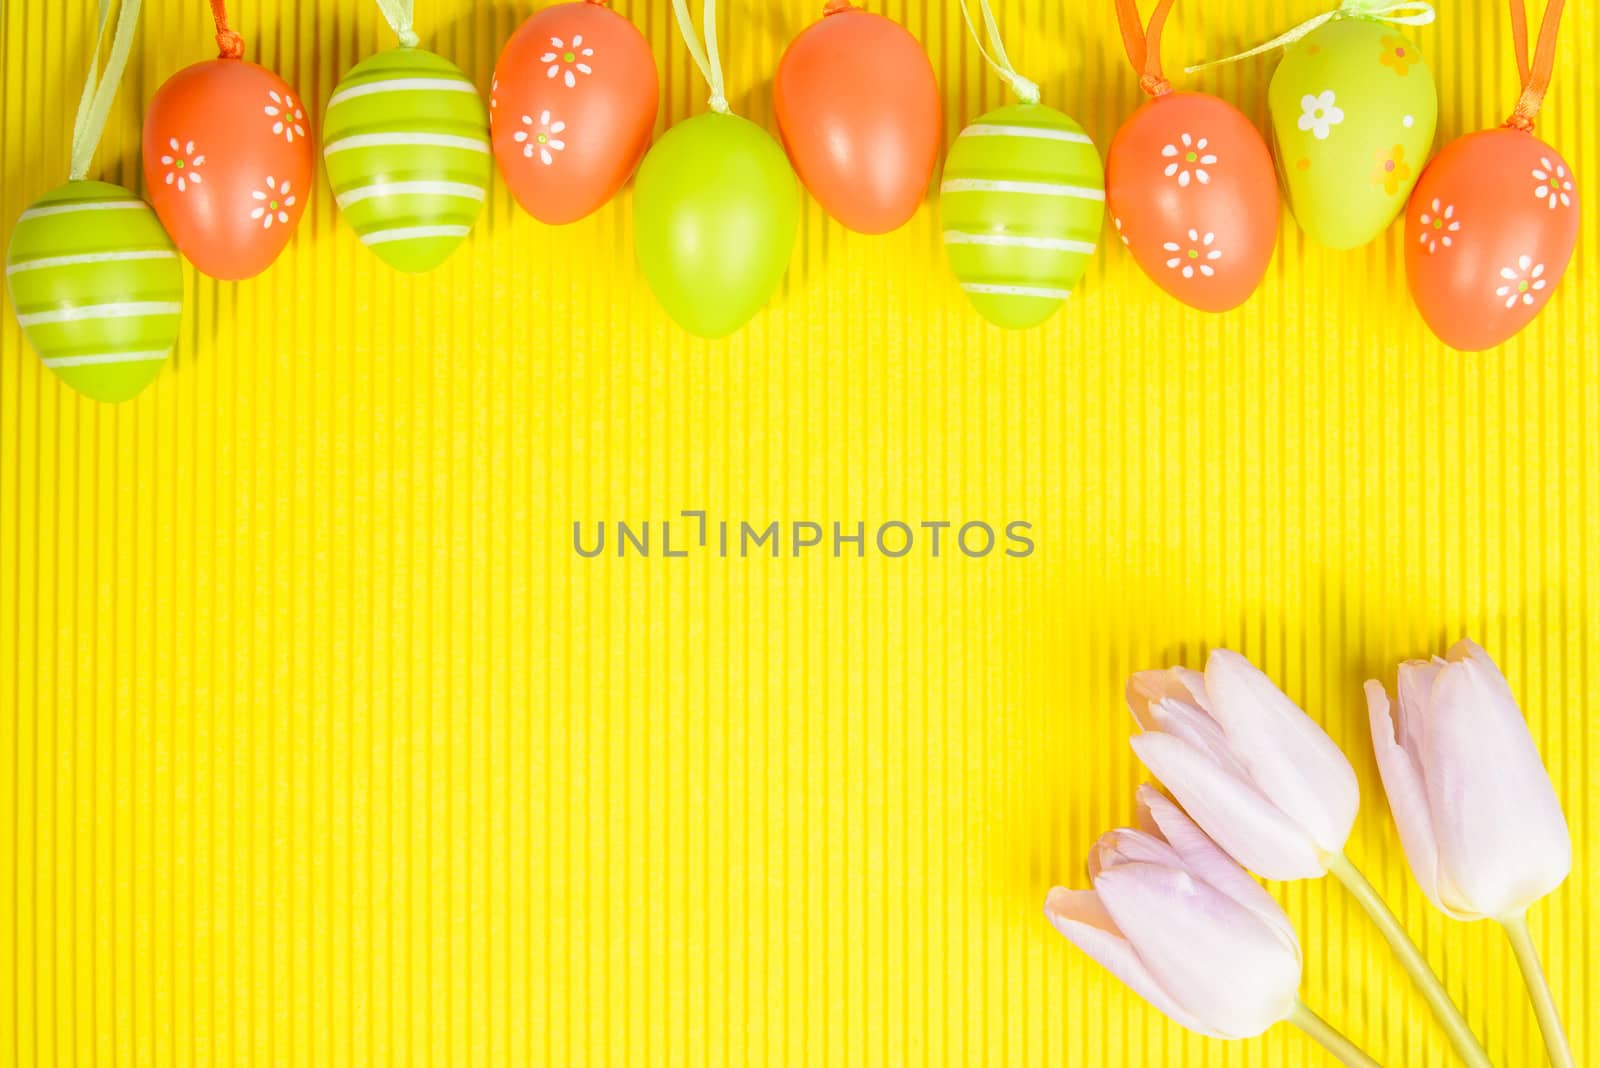 Easter arrangement on yellow background, visible orange and green  decorated eggs and pink tulips in right corner, space for text provided.